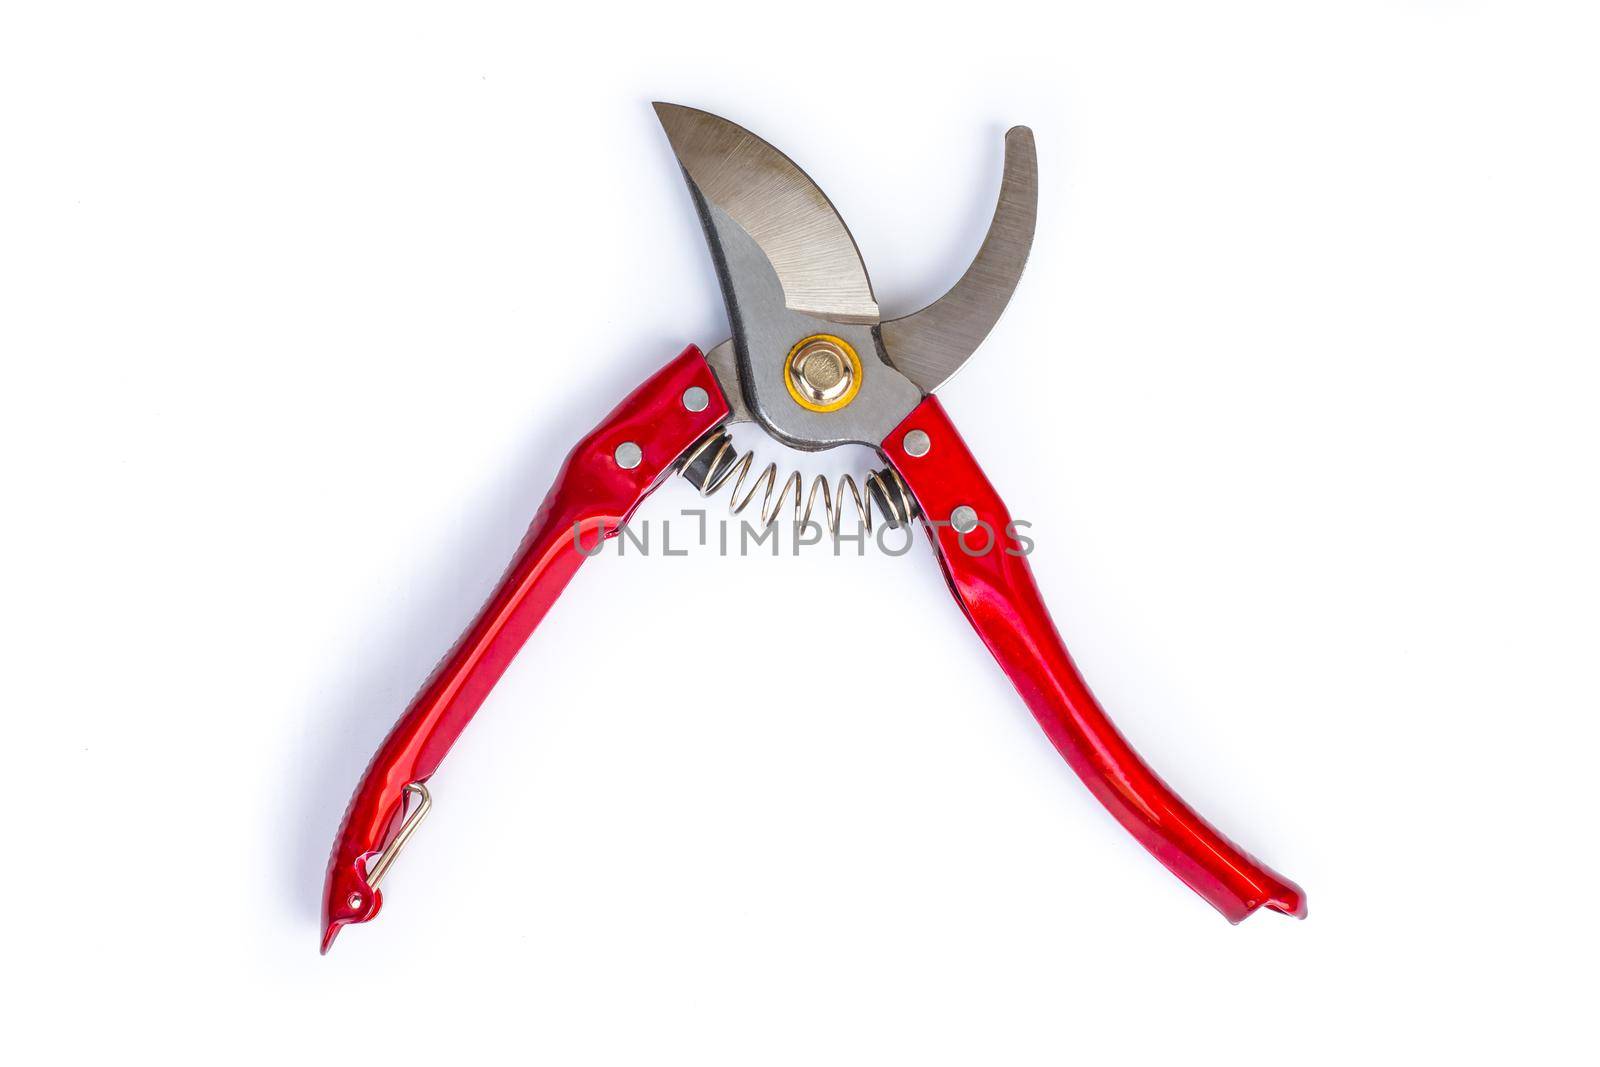 Garden pruner with red iron handles. Cutting scissors on a white background.